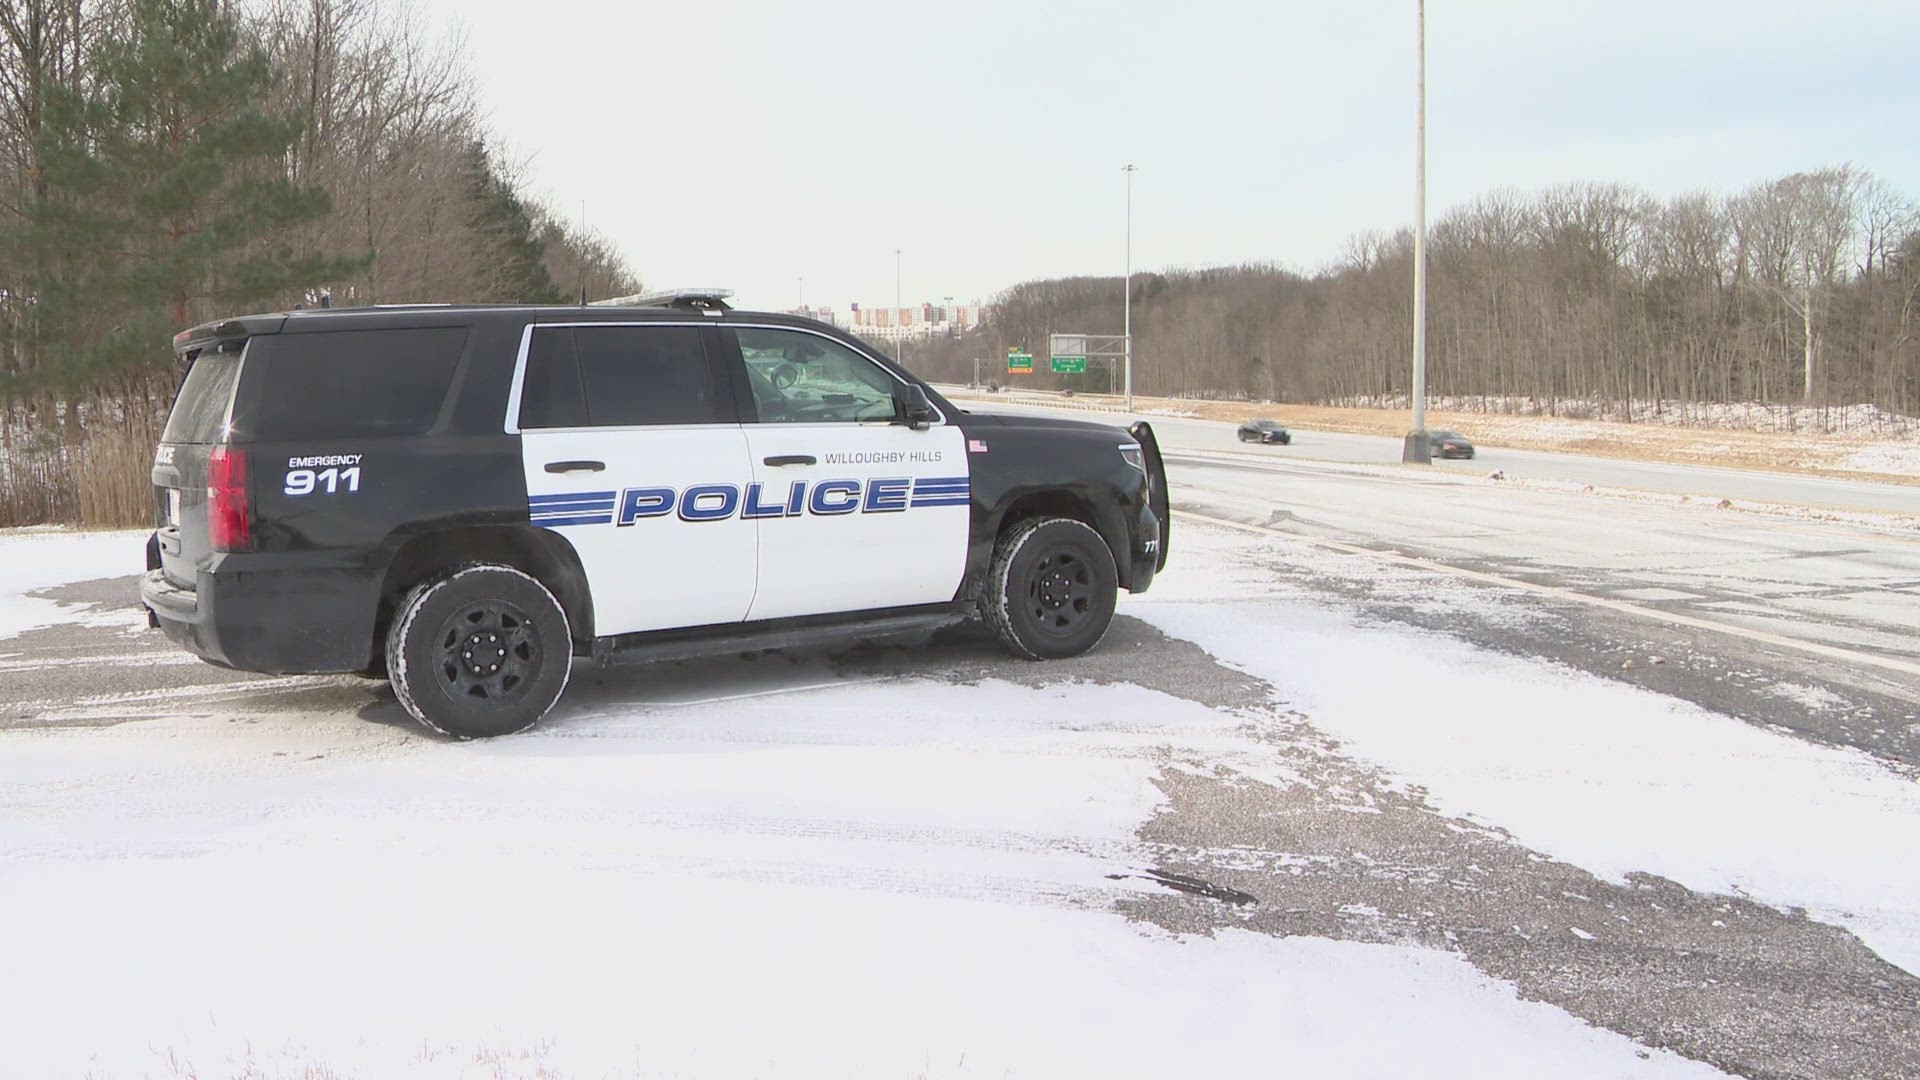 After a month-long grace period, Willoughby Hills is now going after excessive speeders with citations as officers are targeting drivers on I-90 and I-271.